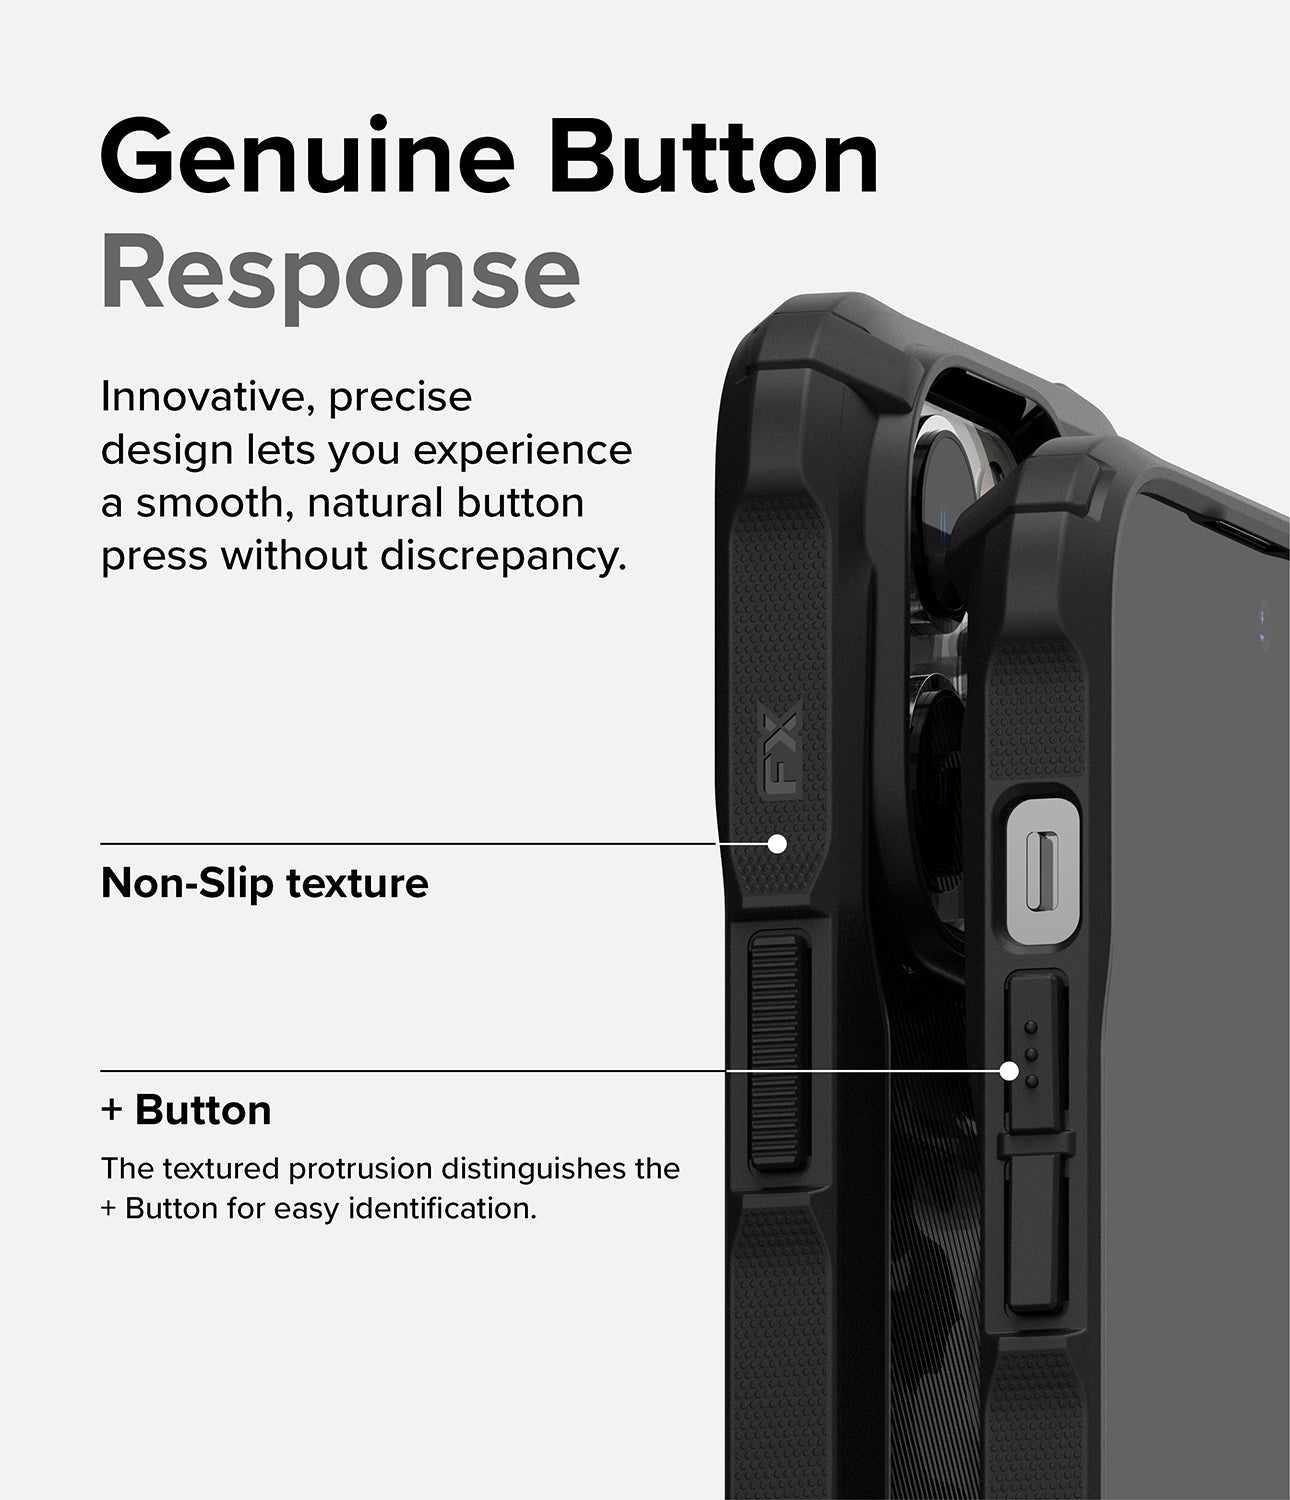 iPhone 14 Pro Max Case | Fusion-X - Camo Black - Genuine Button Response. Innovative, precise design lets you experience a smooth, natural button press without discrepancy. Non-Slip Texture. + Button. The textured protrusion distinguishes the + button for easy identification.